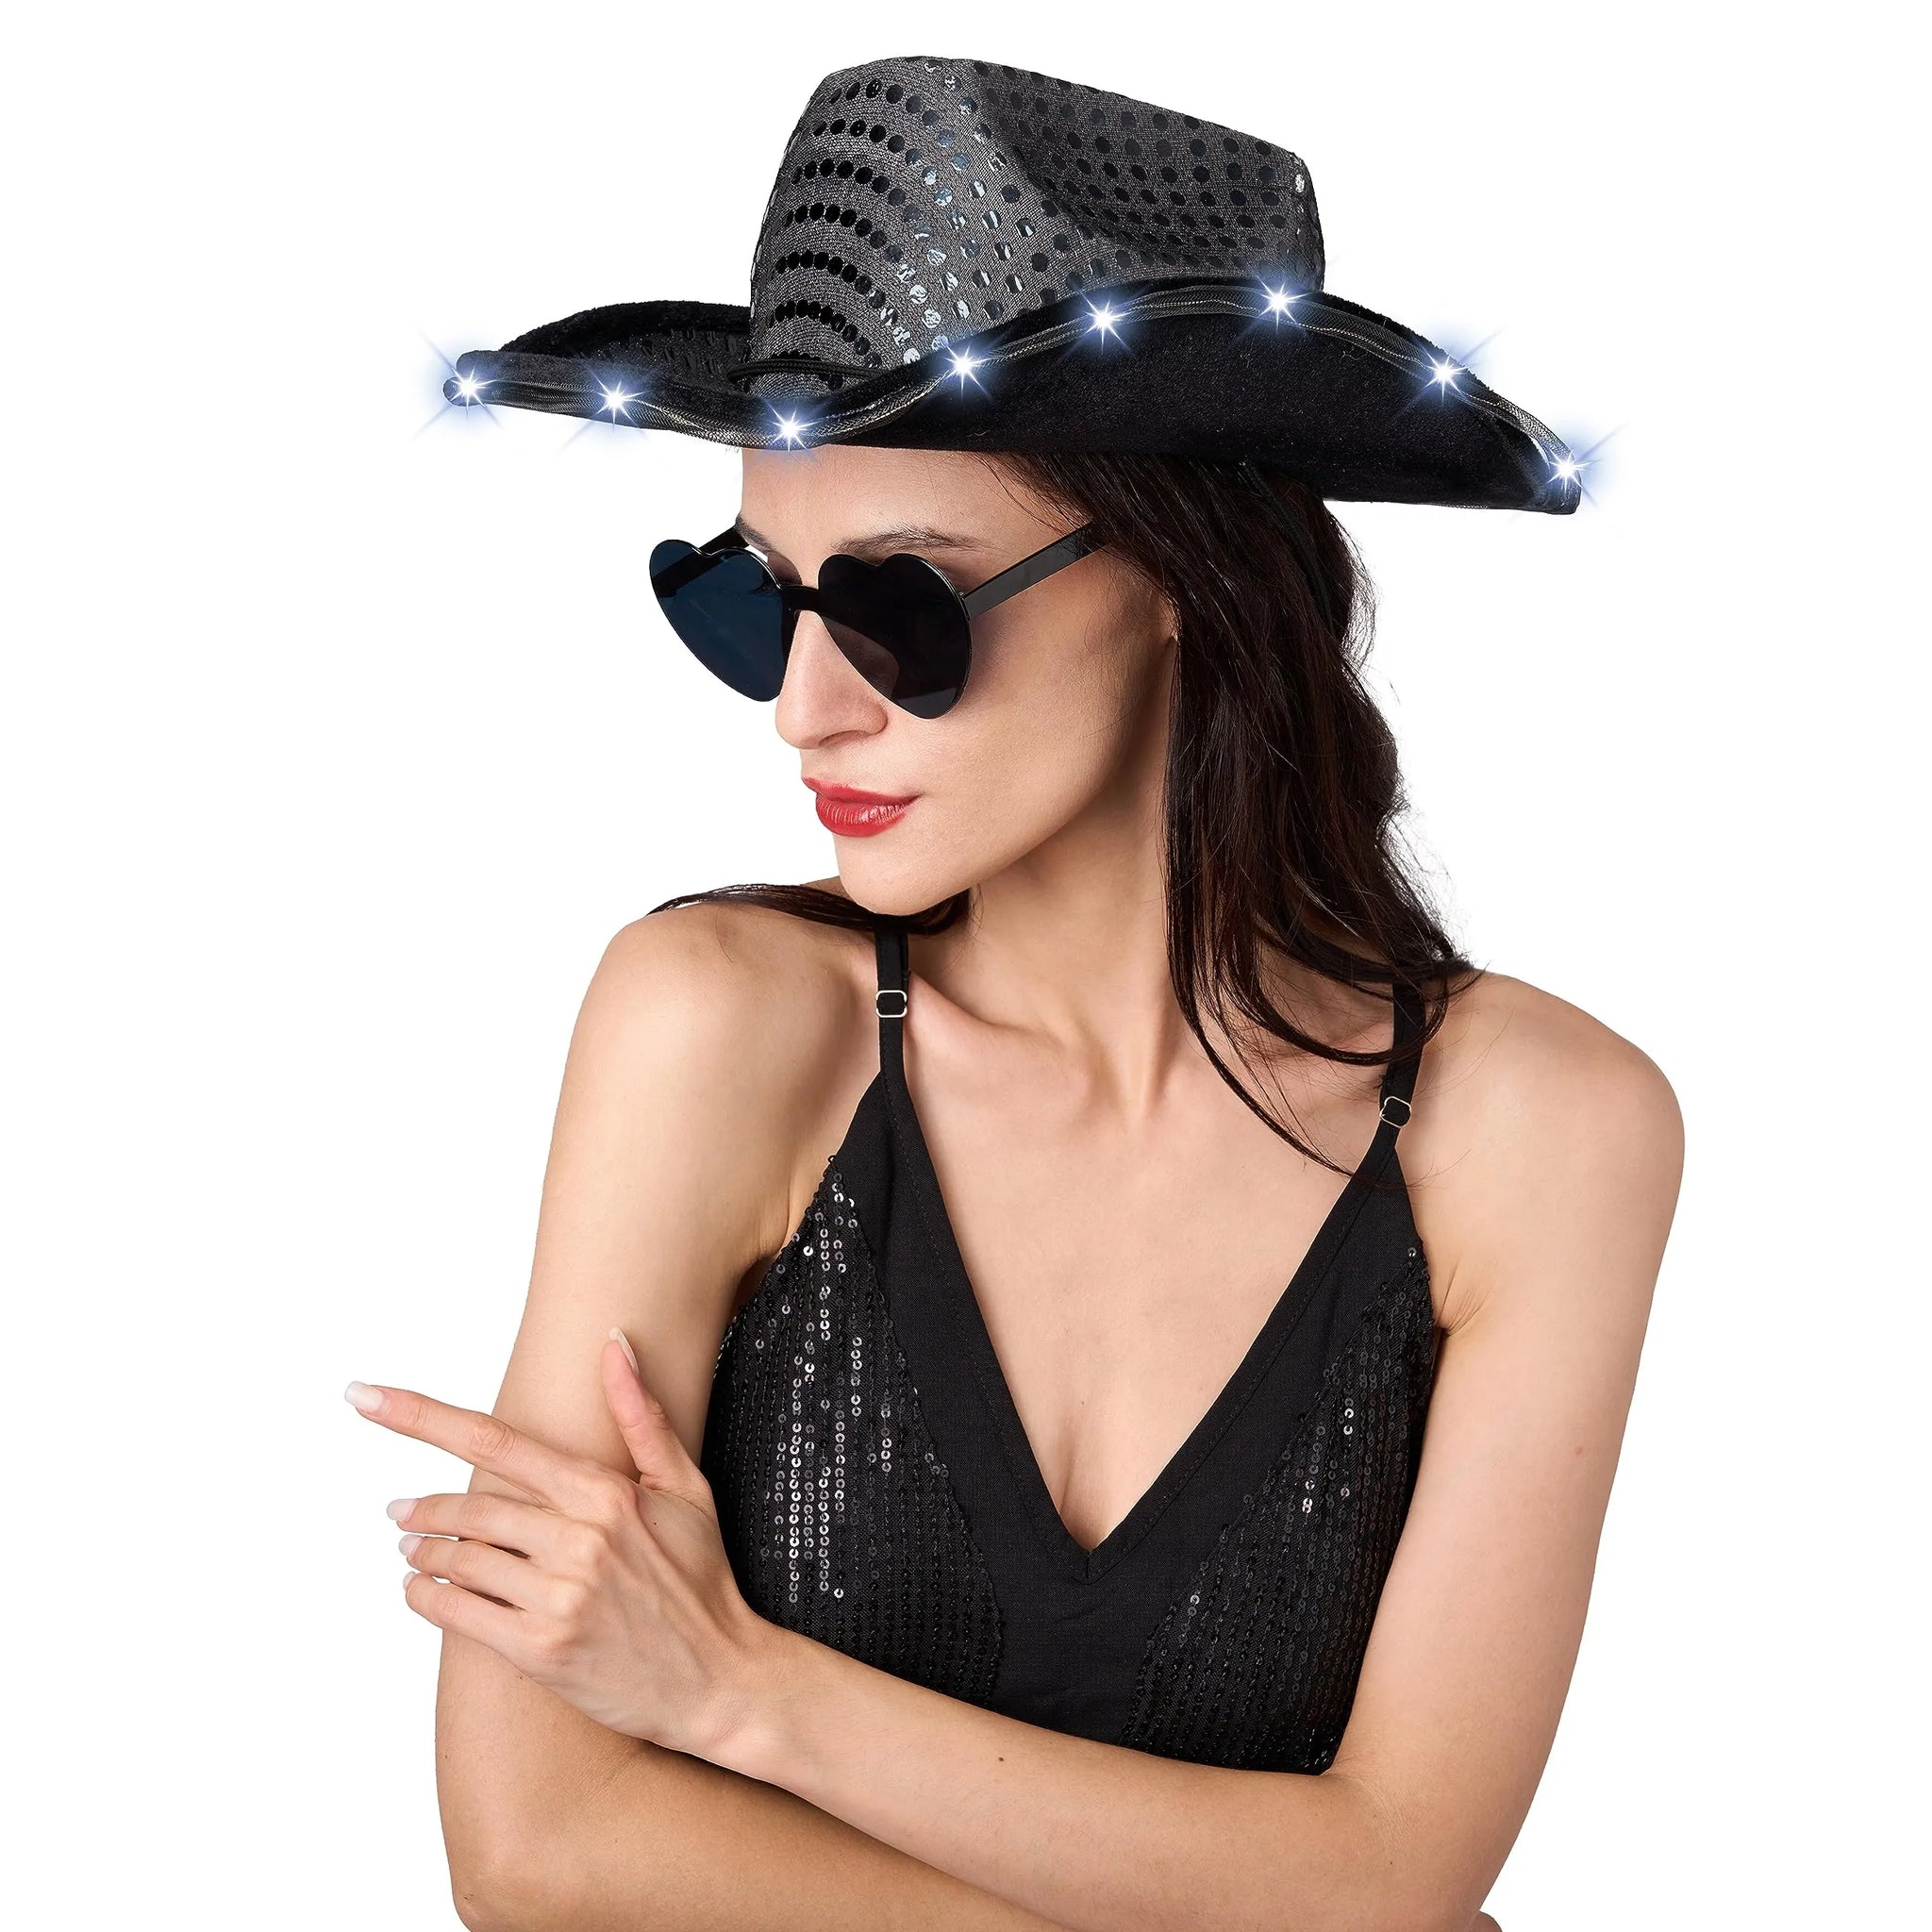 Black Sequin Light-Up Cowboy Hat with Glasses for Women Girls Hallowee